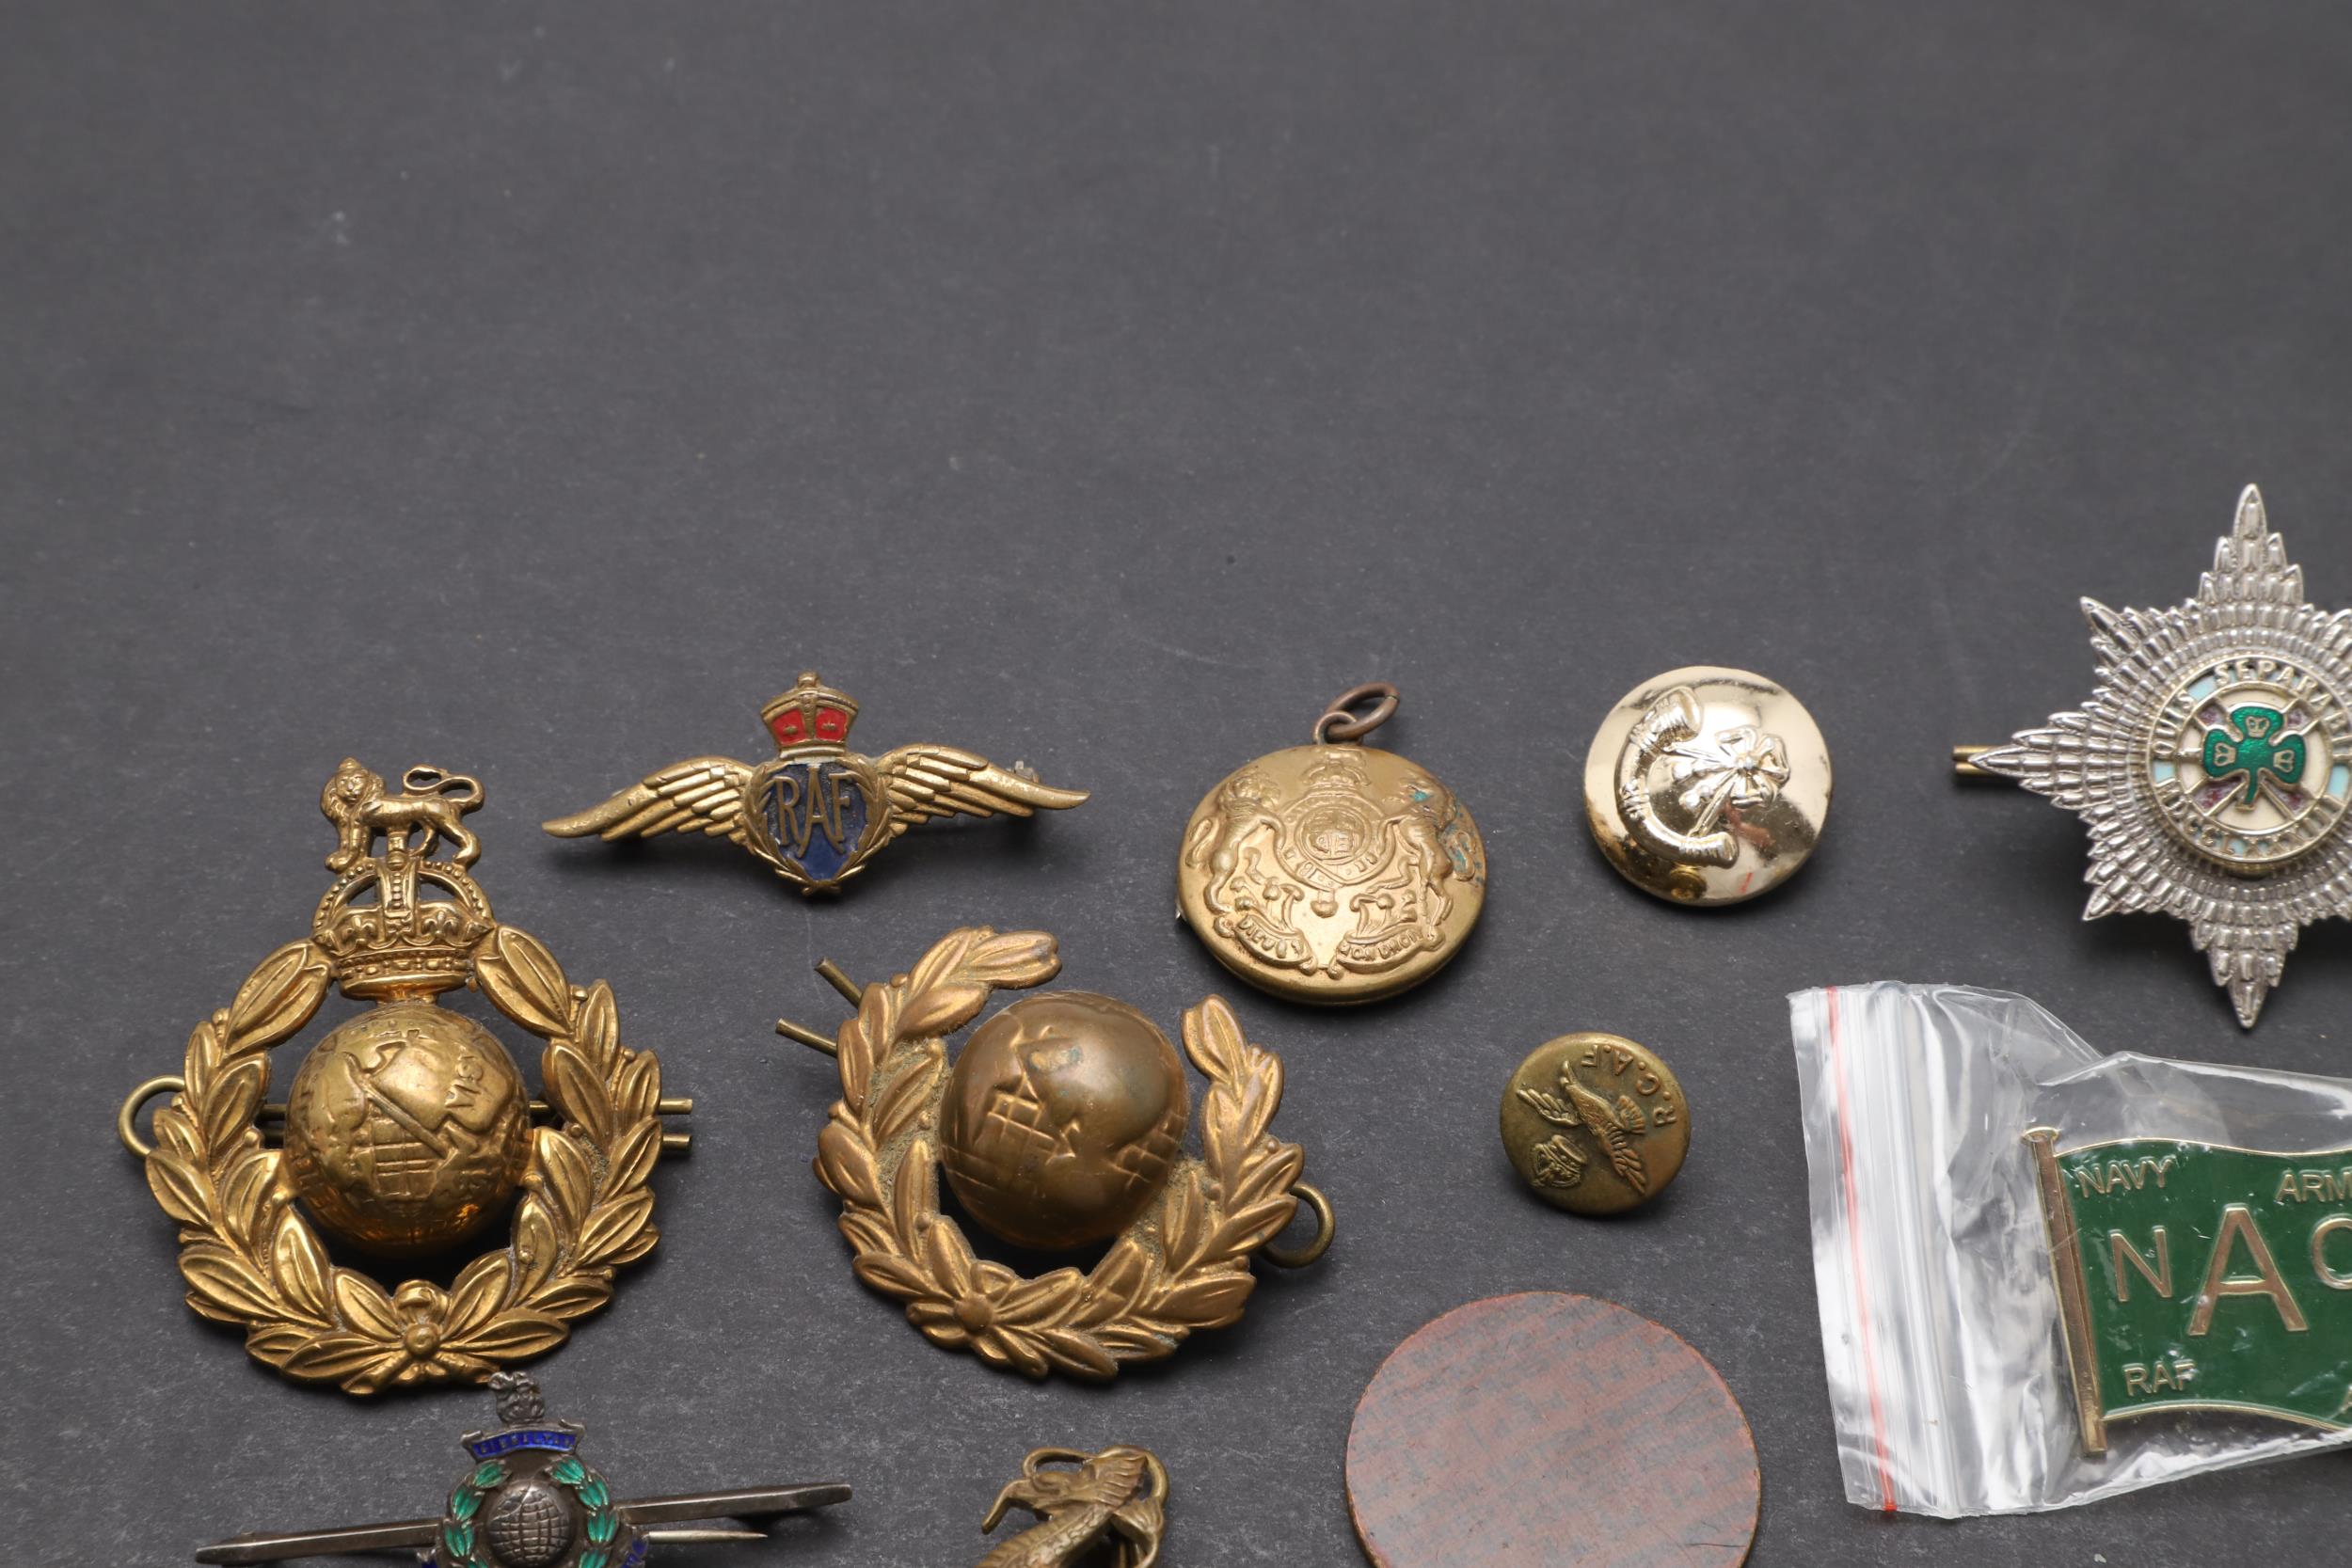 AN INTERESTING COLLECTION OF MILITARY BADGES, BUTTONS AND INSIGNIA. - Image 3 of 9